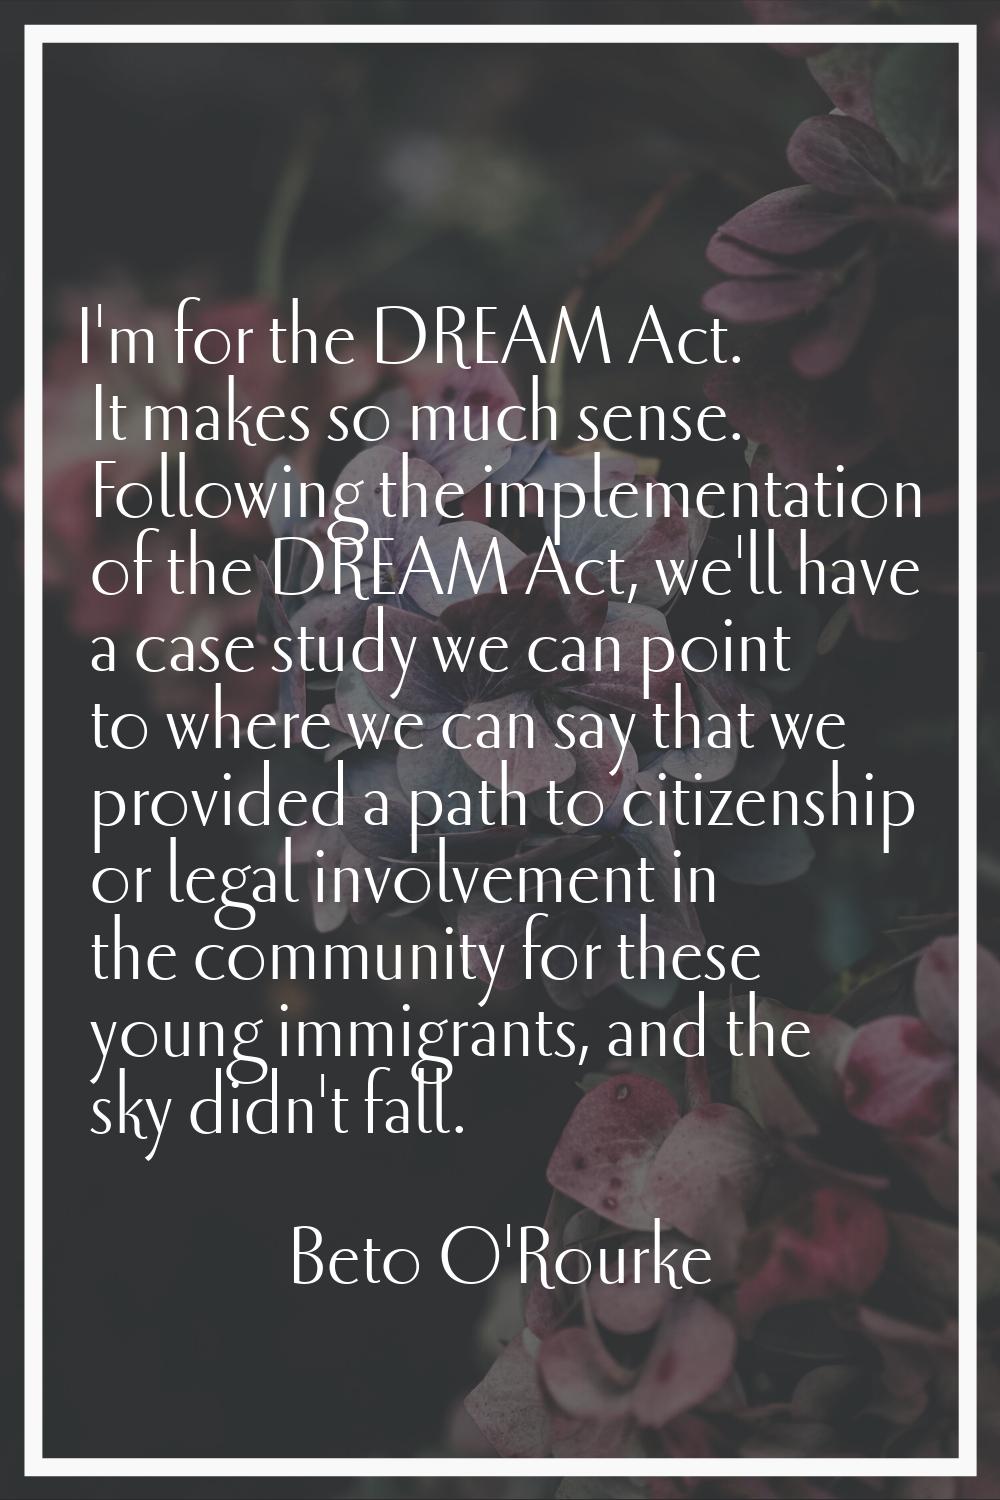 I'm for the DREAM Act. It makes so much sense. Following the implementation of the DREAM Act, we'll